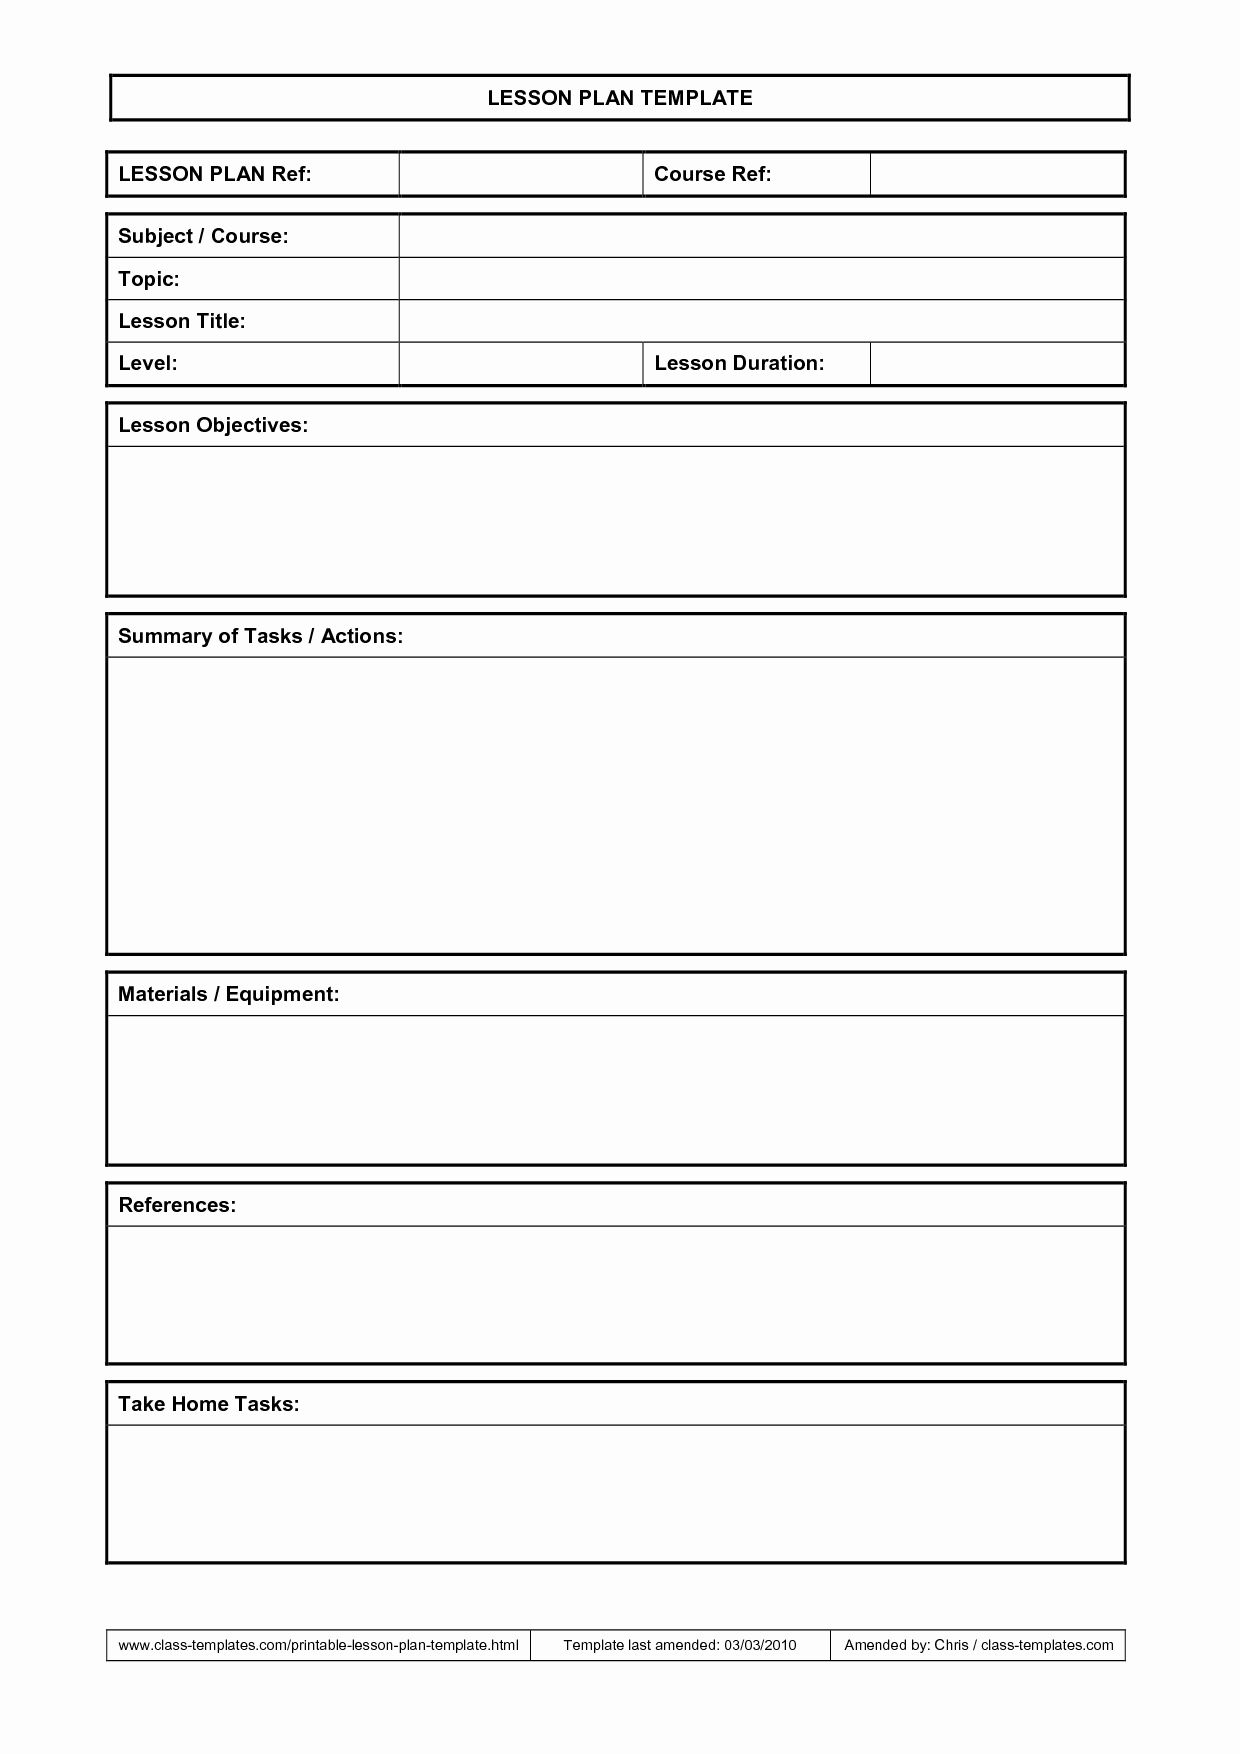 Lesson Plan Template Daily Awesome Lesson Plan Template …